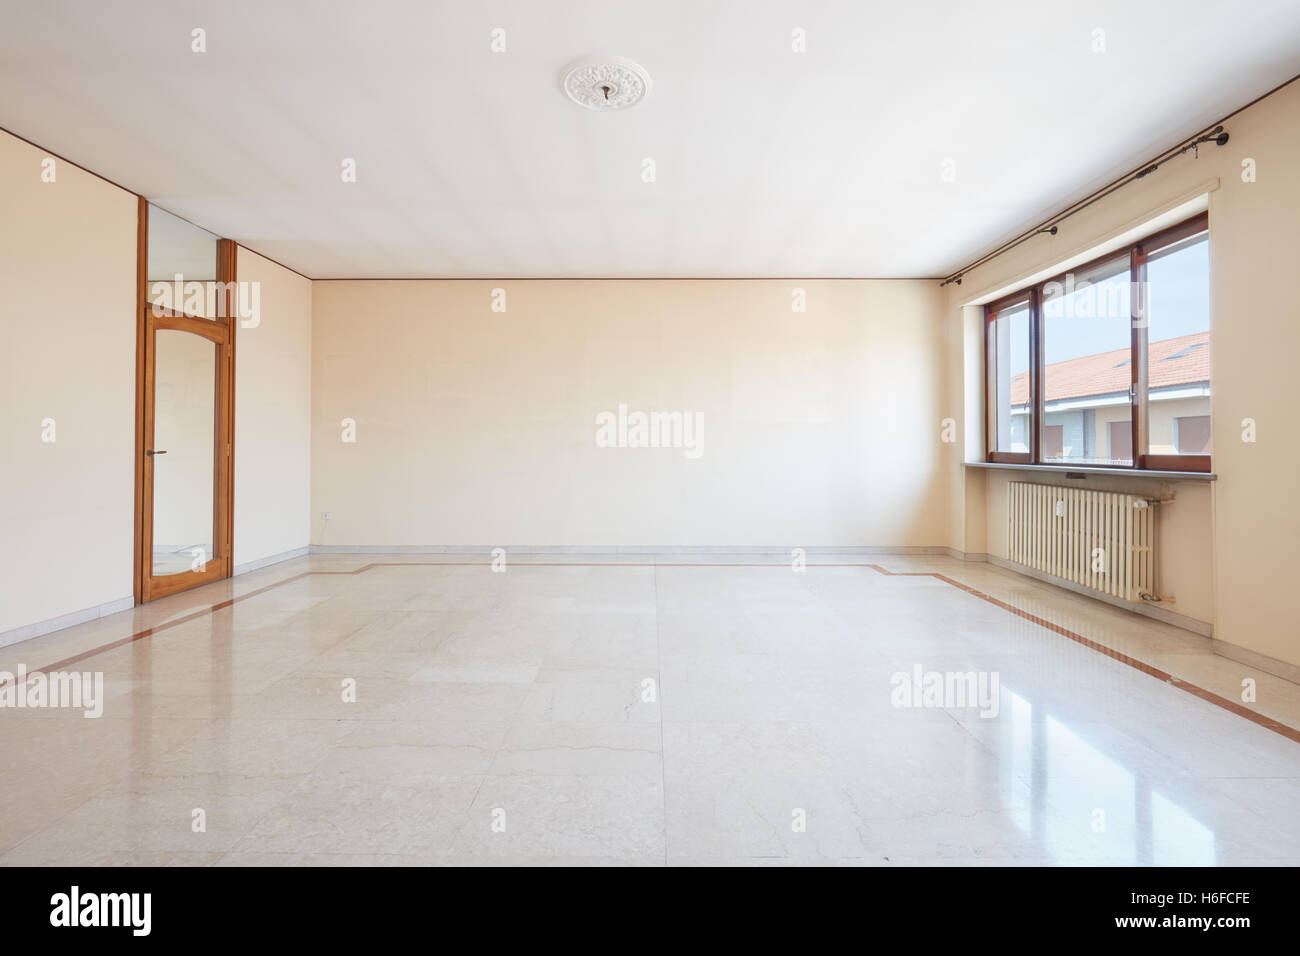 Large empty living room interior with marble floor Stock Photo